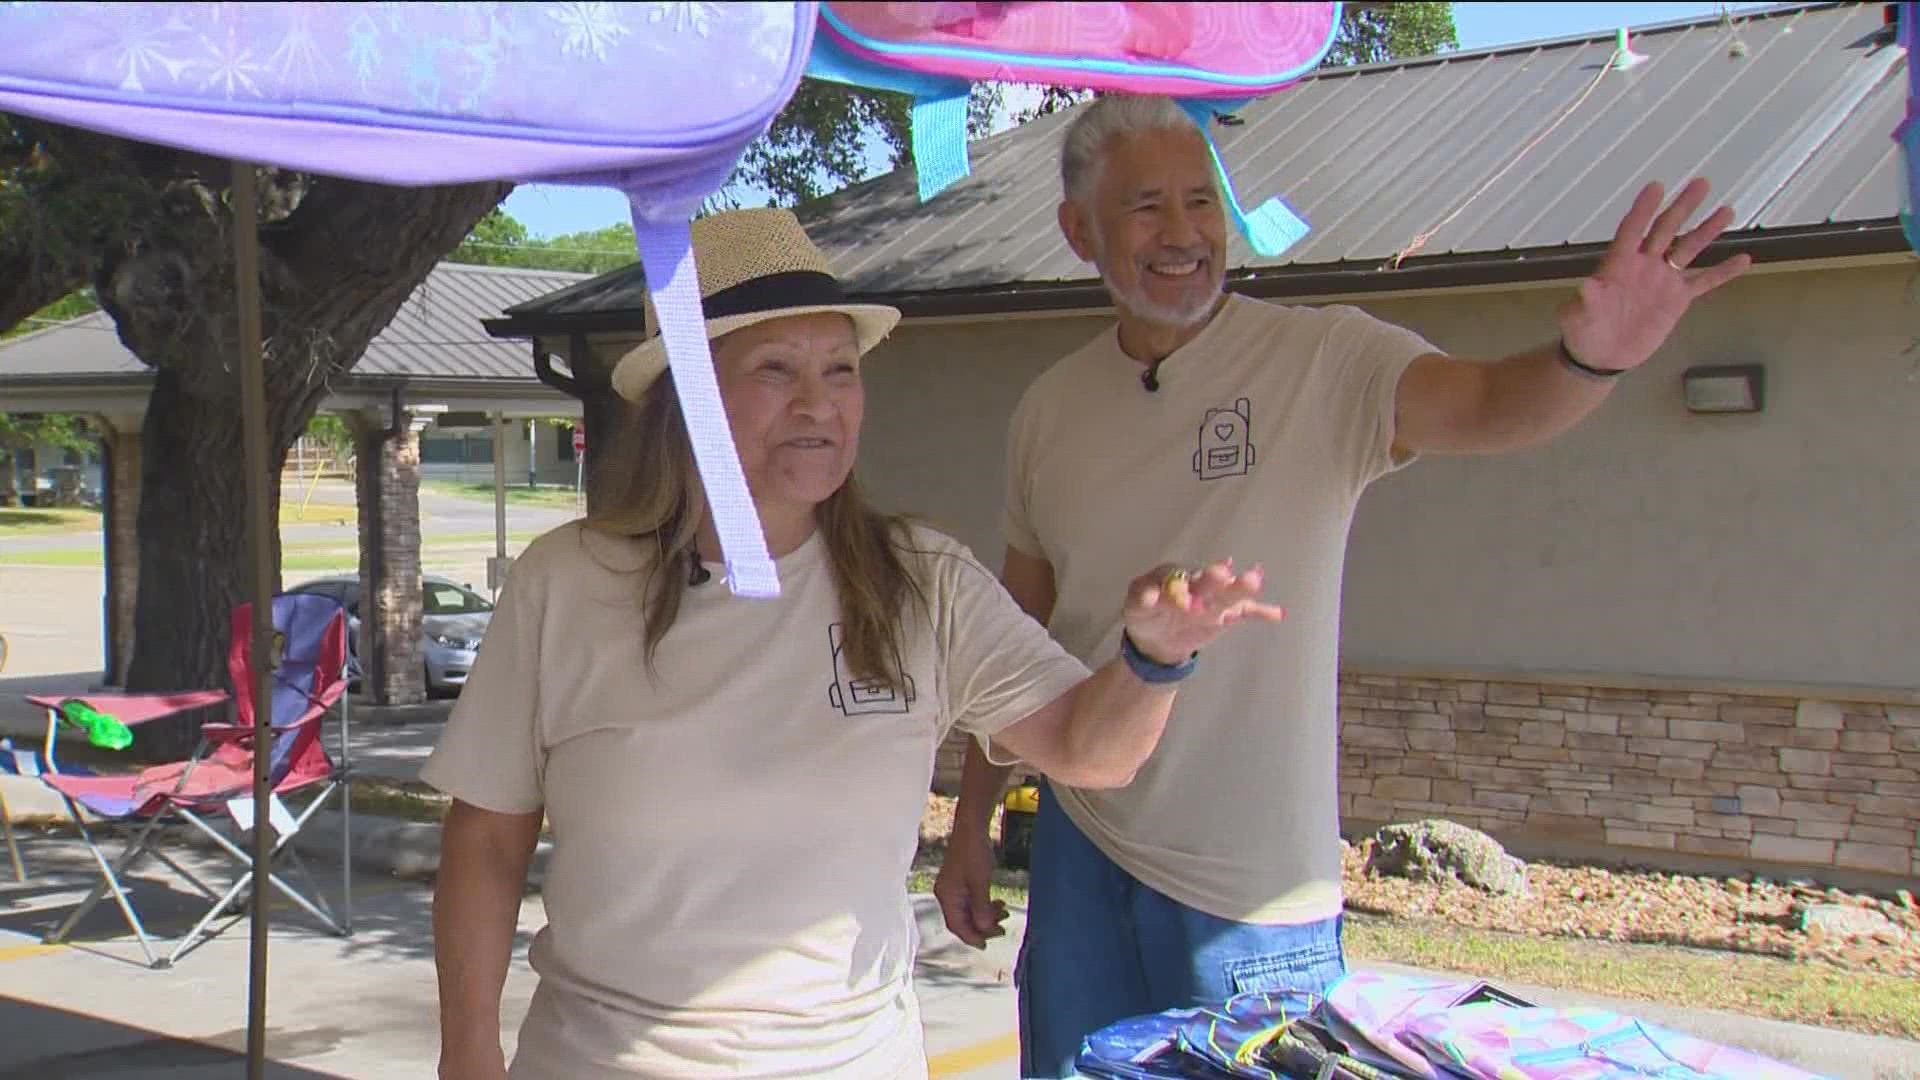 With school right around the corner, Louis and Connie Amaya decided to help parents and give one of the priciest school supplies to kids for free.